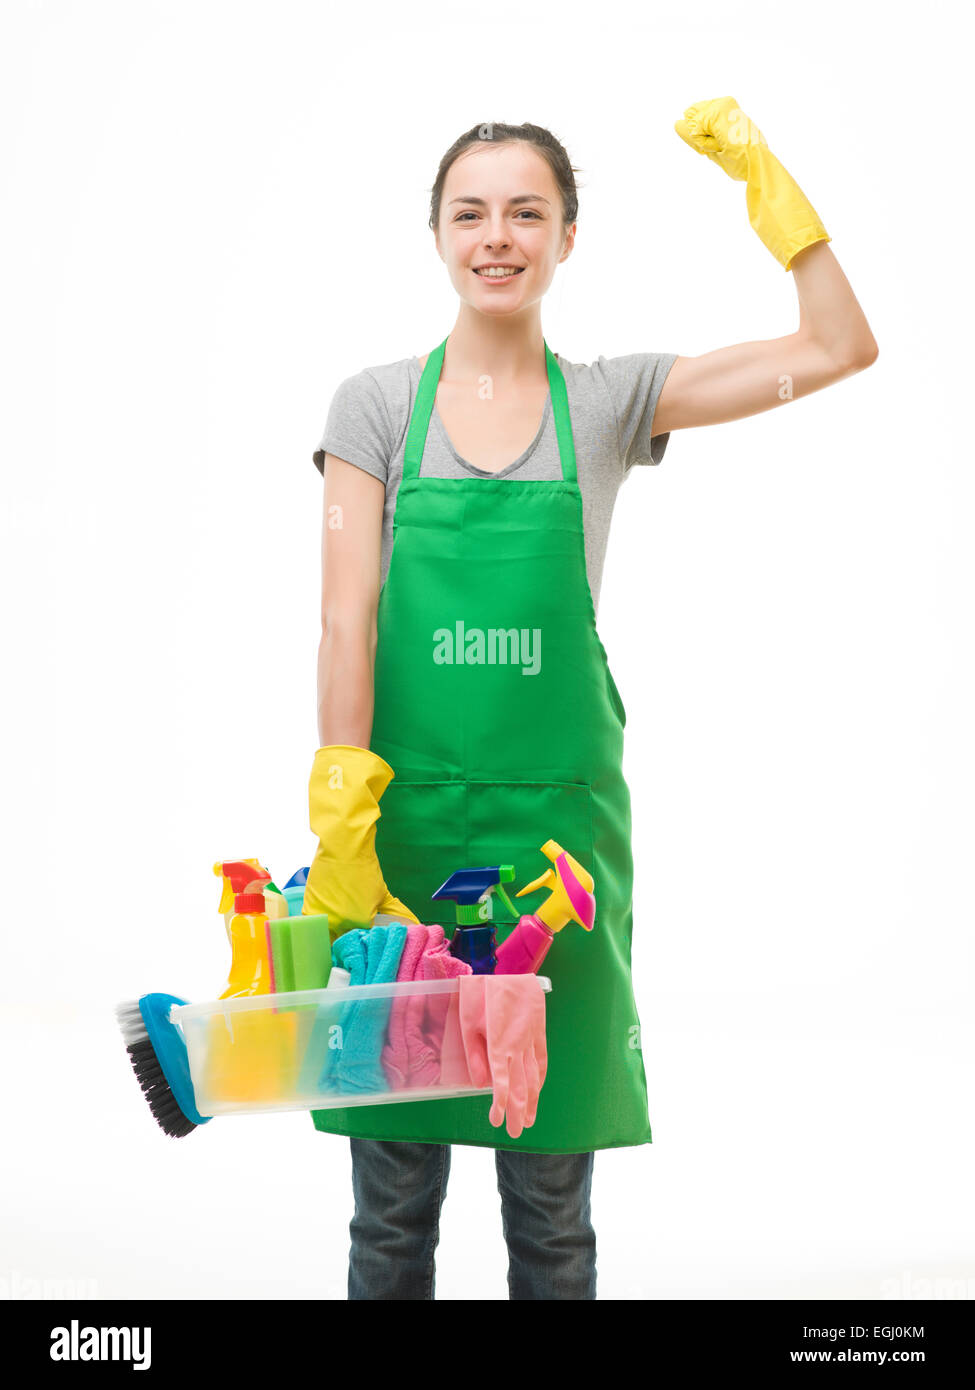 young caucasian woman holding cleaning supplies and flexing her arm muscles against white background Stock Photo